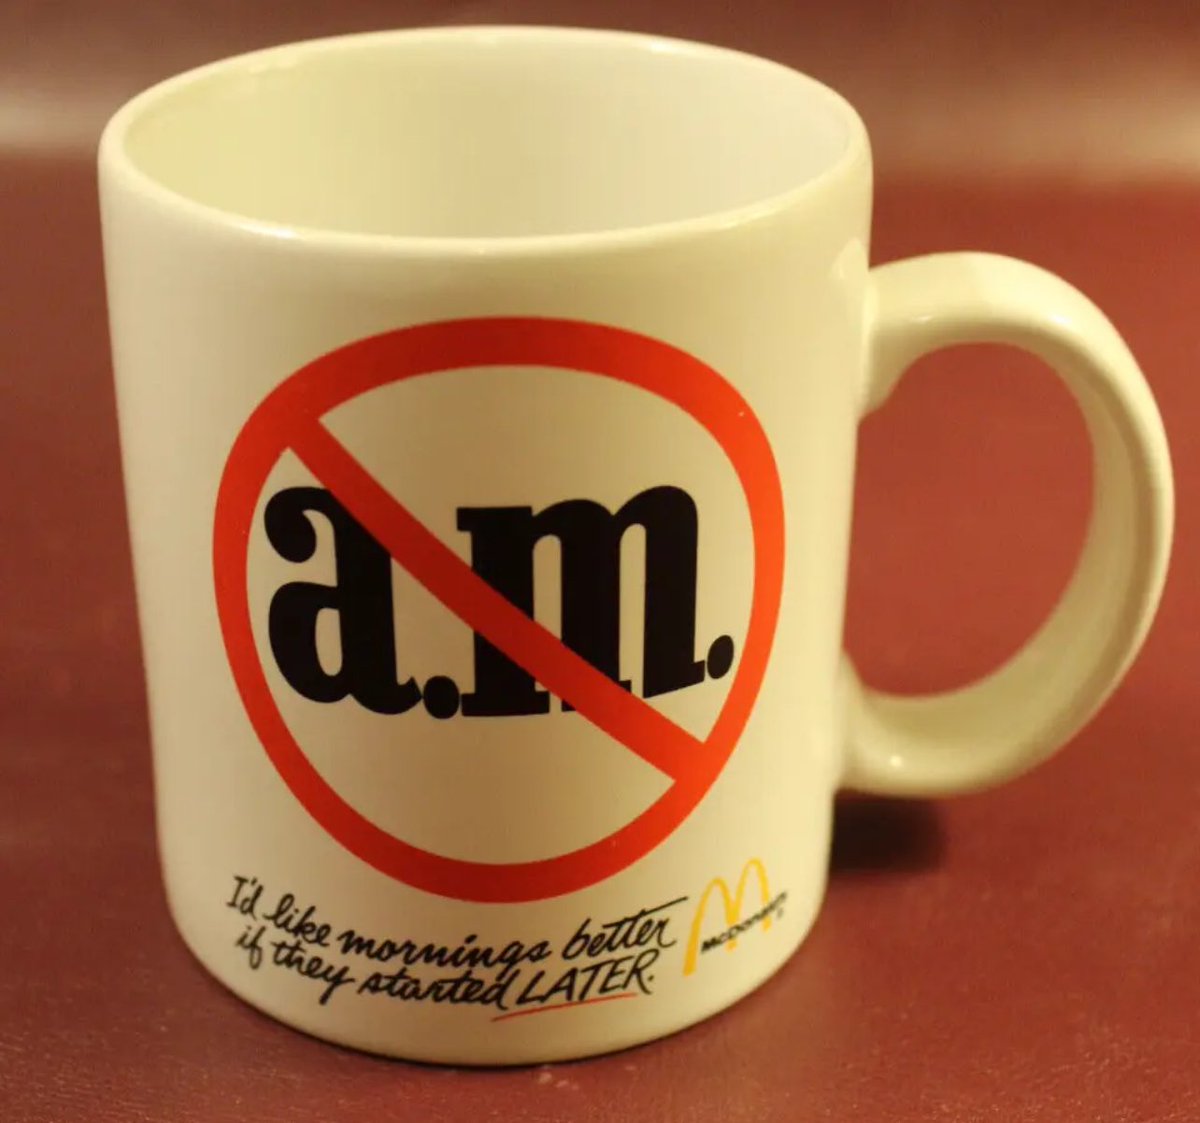 In the 80’s this McDonald’s mug said NO 🚫 to mornings! So controversial yet so brave.